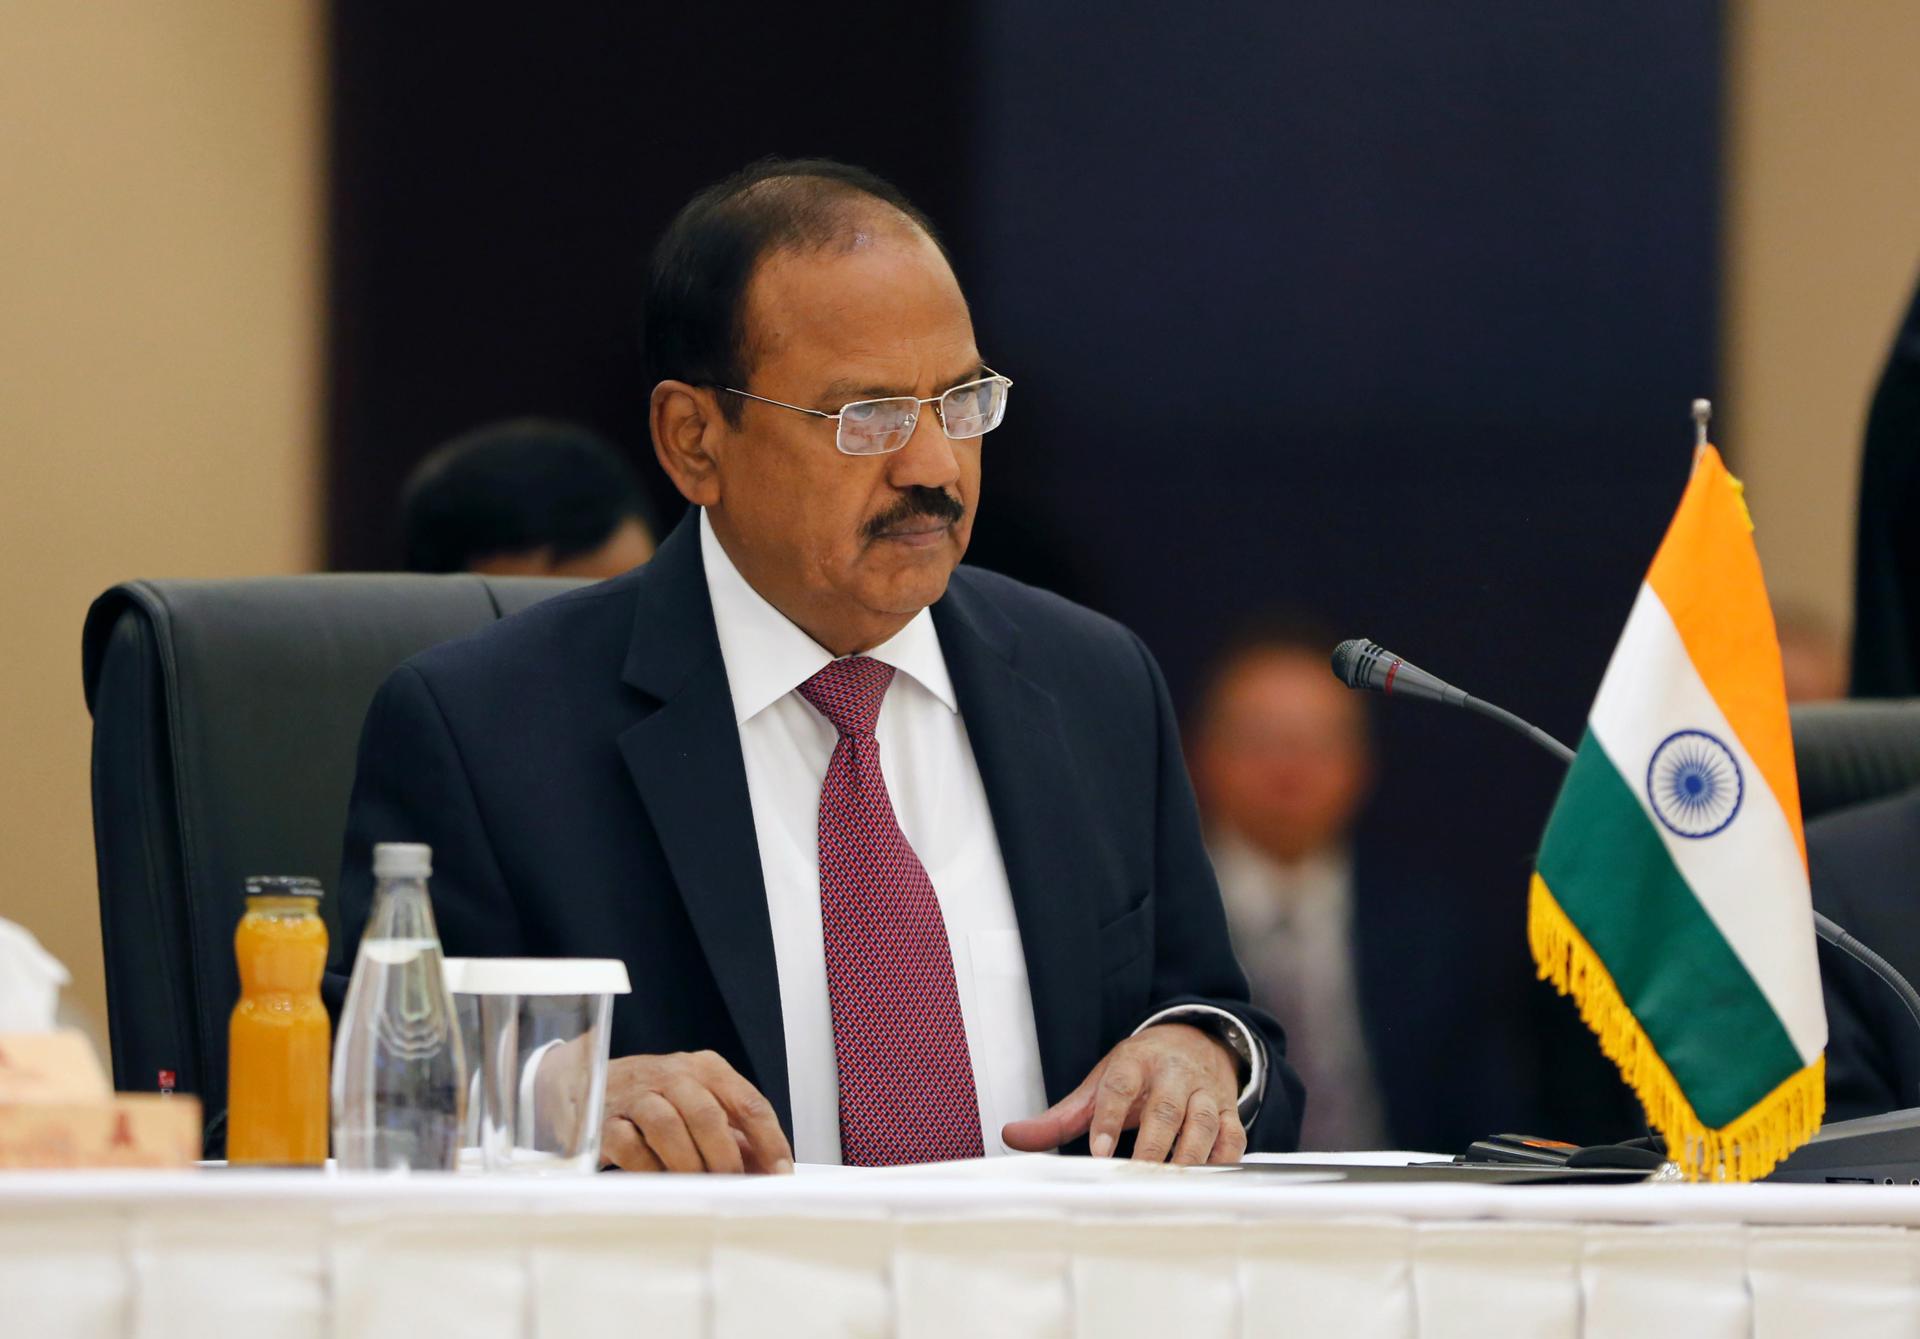 A file picture showing Indian national Security advisor Ajit Doval attending a meeting in Tehran, Iran. EPA/FILE/STR